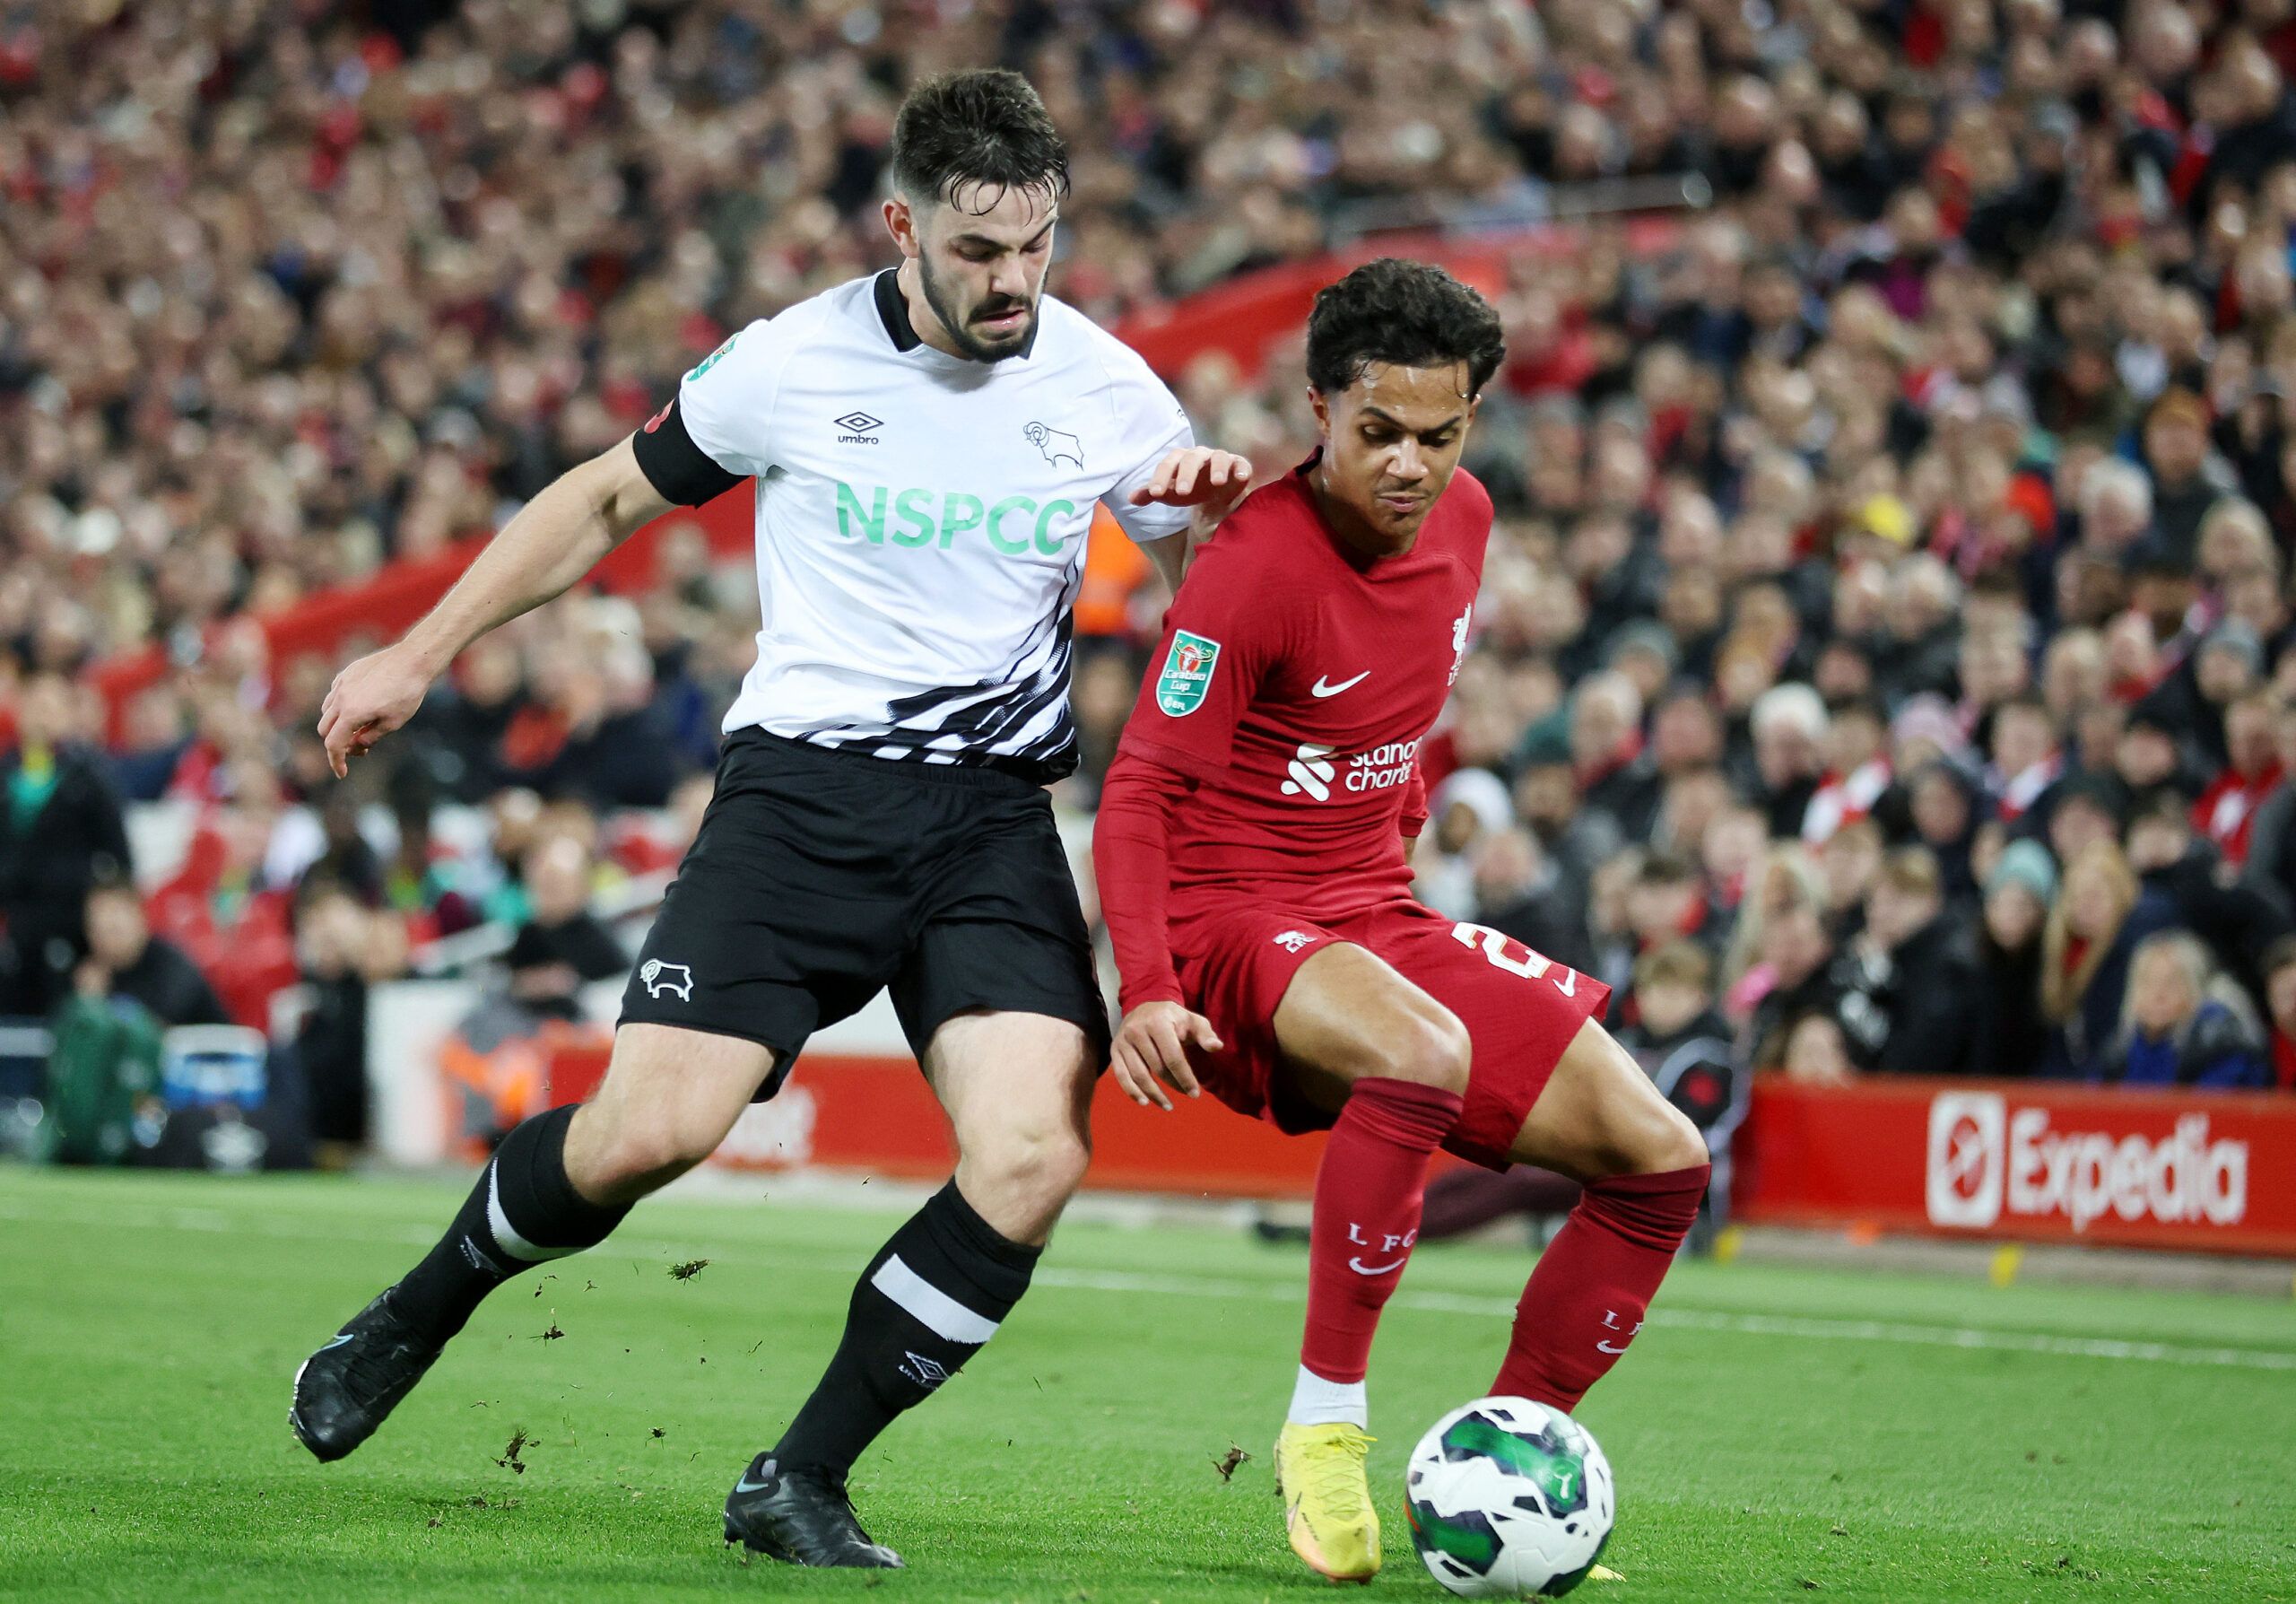 Soccer Football - Carabao Cup Third Round - Liverpool v Derby County - Anfield, Liverpool, Britain - November 9, 2022 Liverpool's Fabio Carvalho in action with Derby County's Eiran Cashin REUTERS/Carl Recine EDITORIAL USE ONLY. No use with unauthorized audio, video, data, fixture lists, club/league logos or 'live' services. Online in-match use limited to 75 images, no video emulation. No use in betting, games or single club /league/player publications.  Please contact your account representative